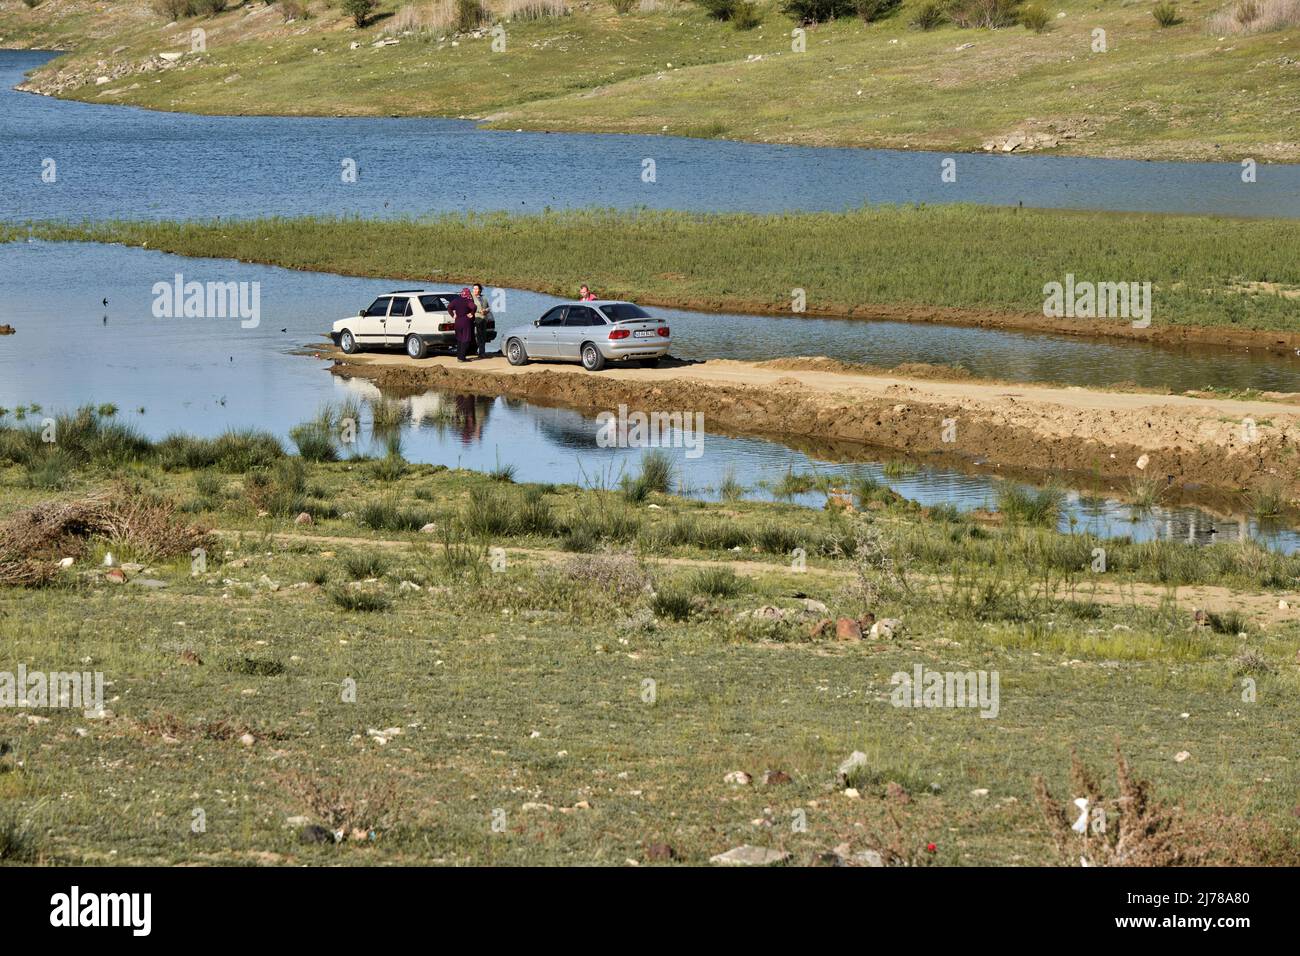 04.05.2022. Manisa. Turkey. People parking very close to lake by old cars. People and car reflection on water. Stock Photo